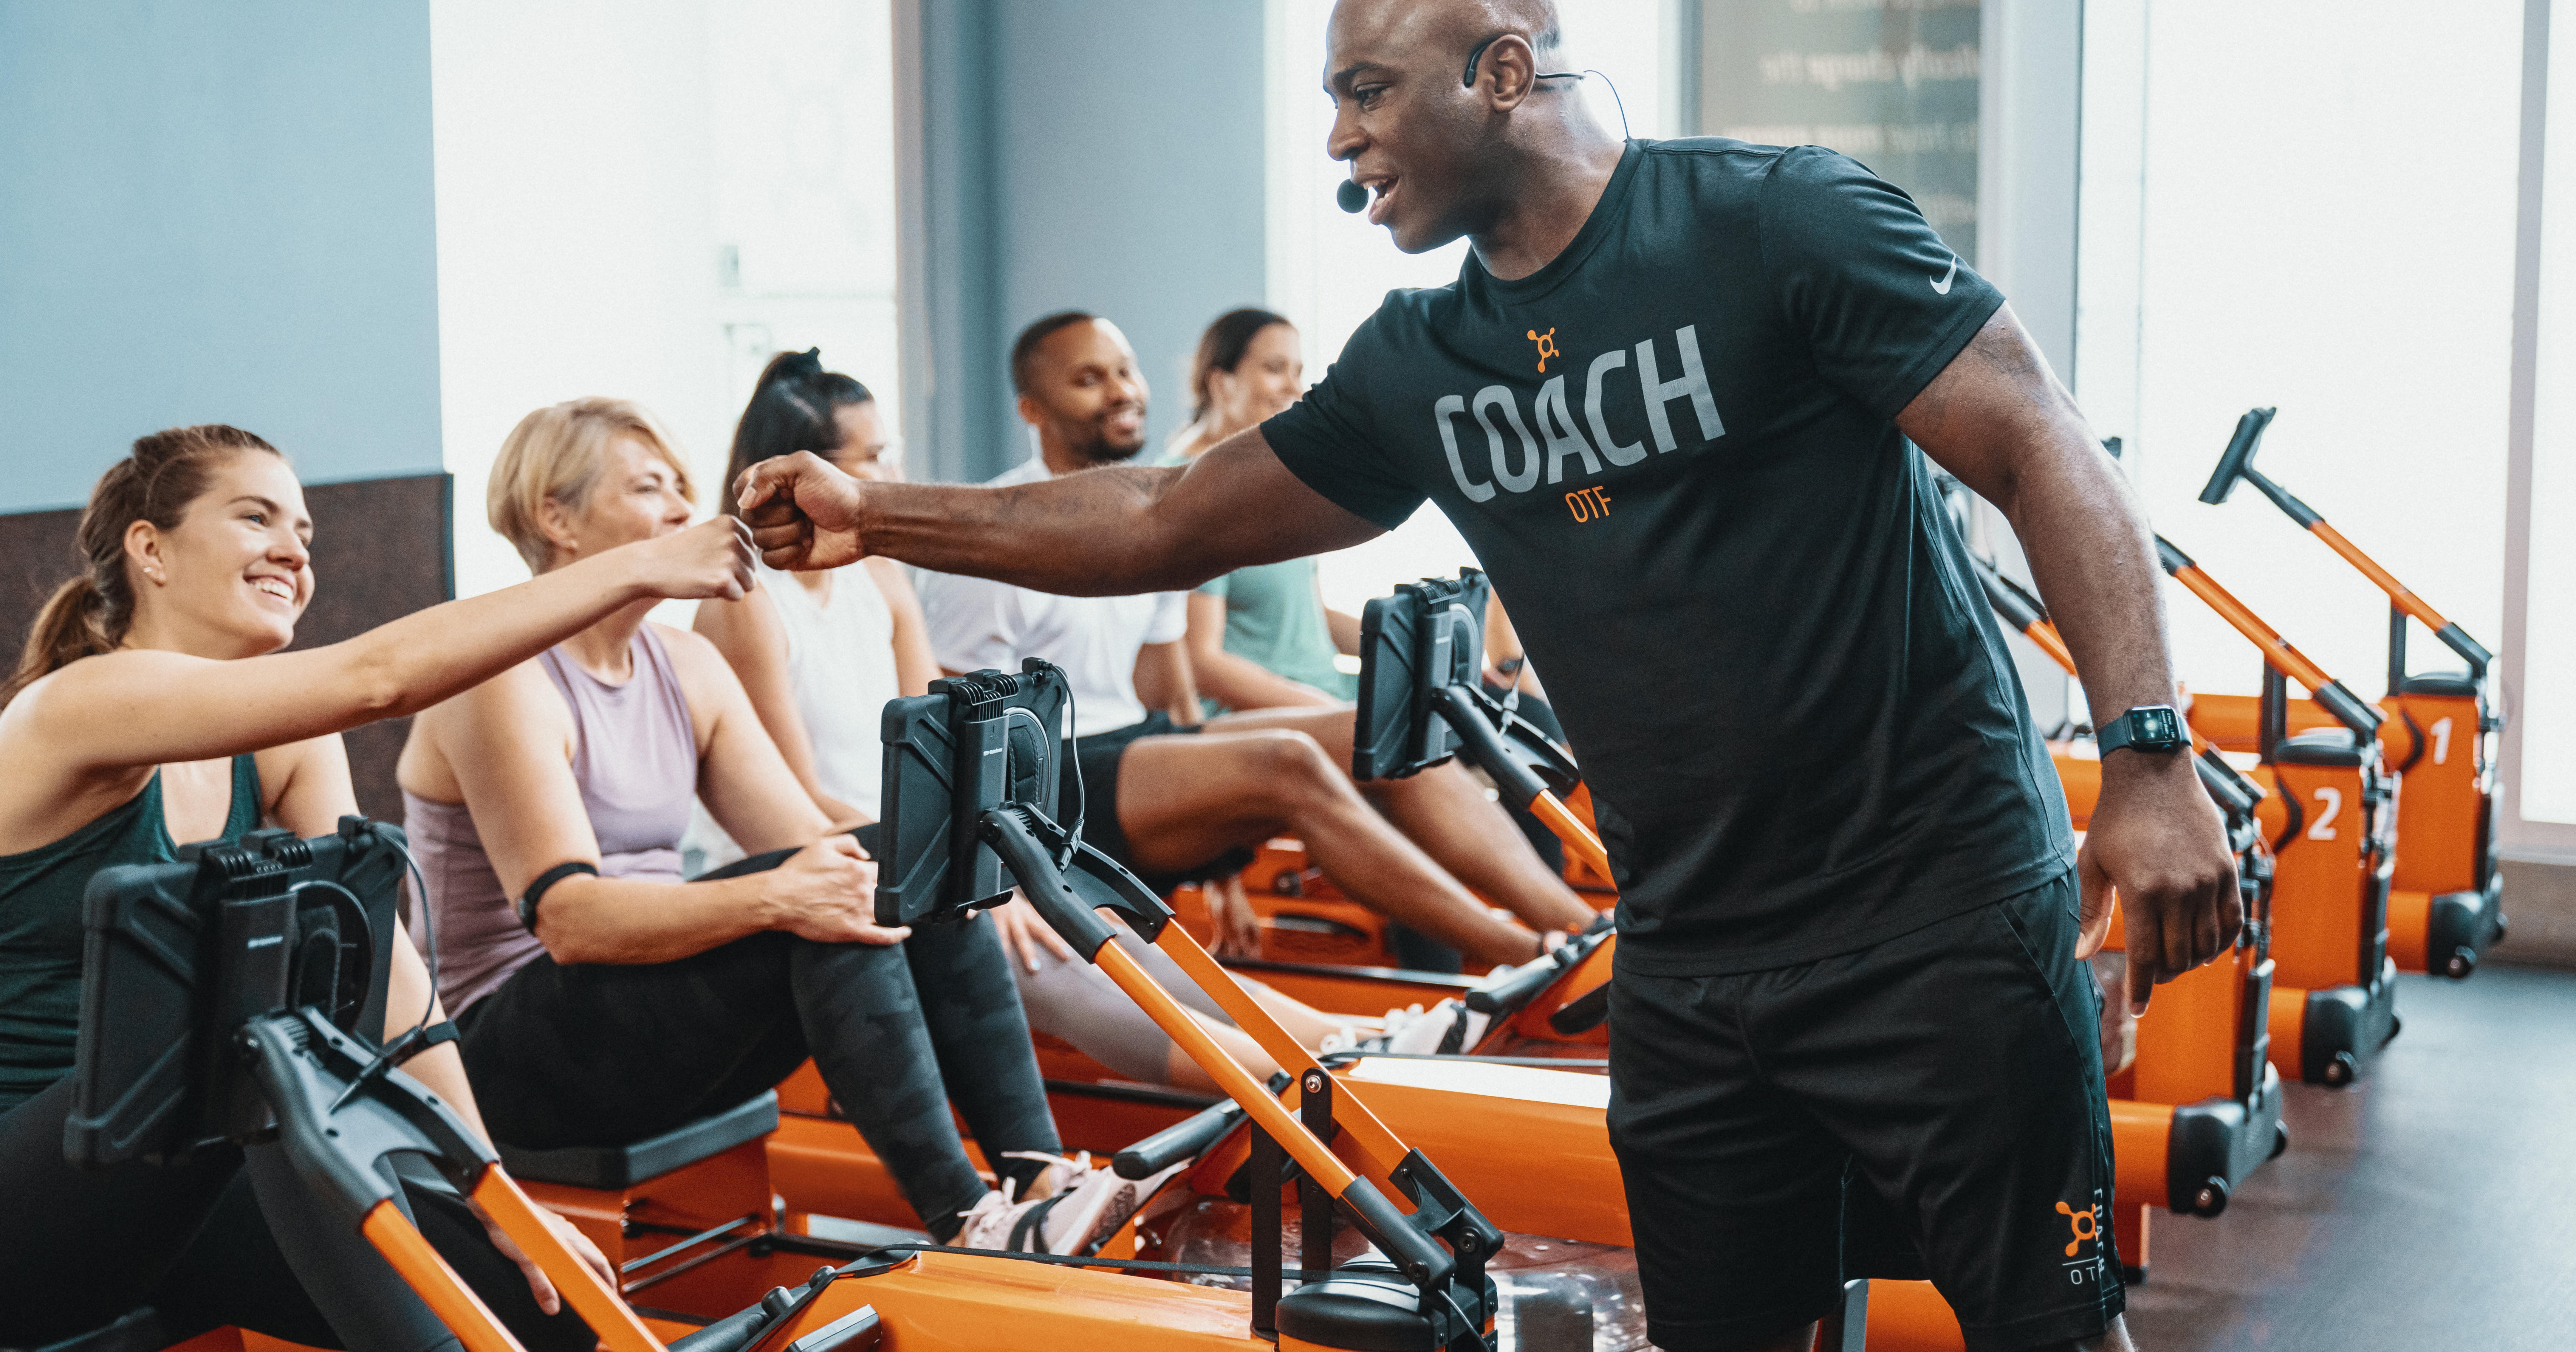 7 OTF events ideas  orange theory workout, networking event